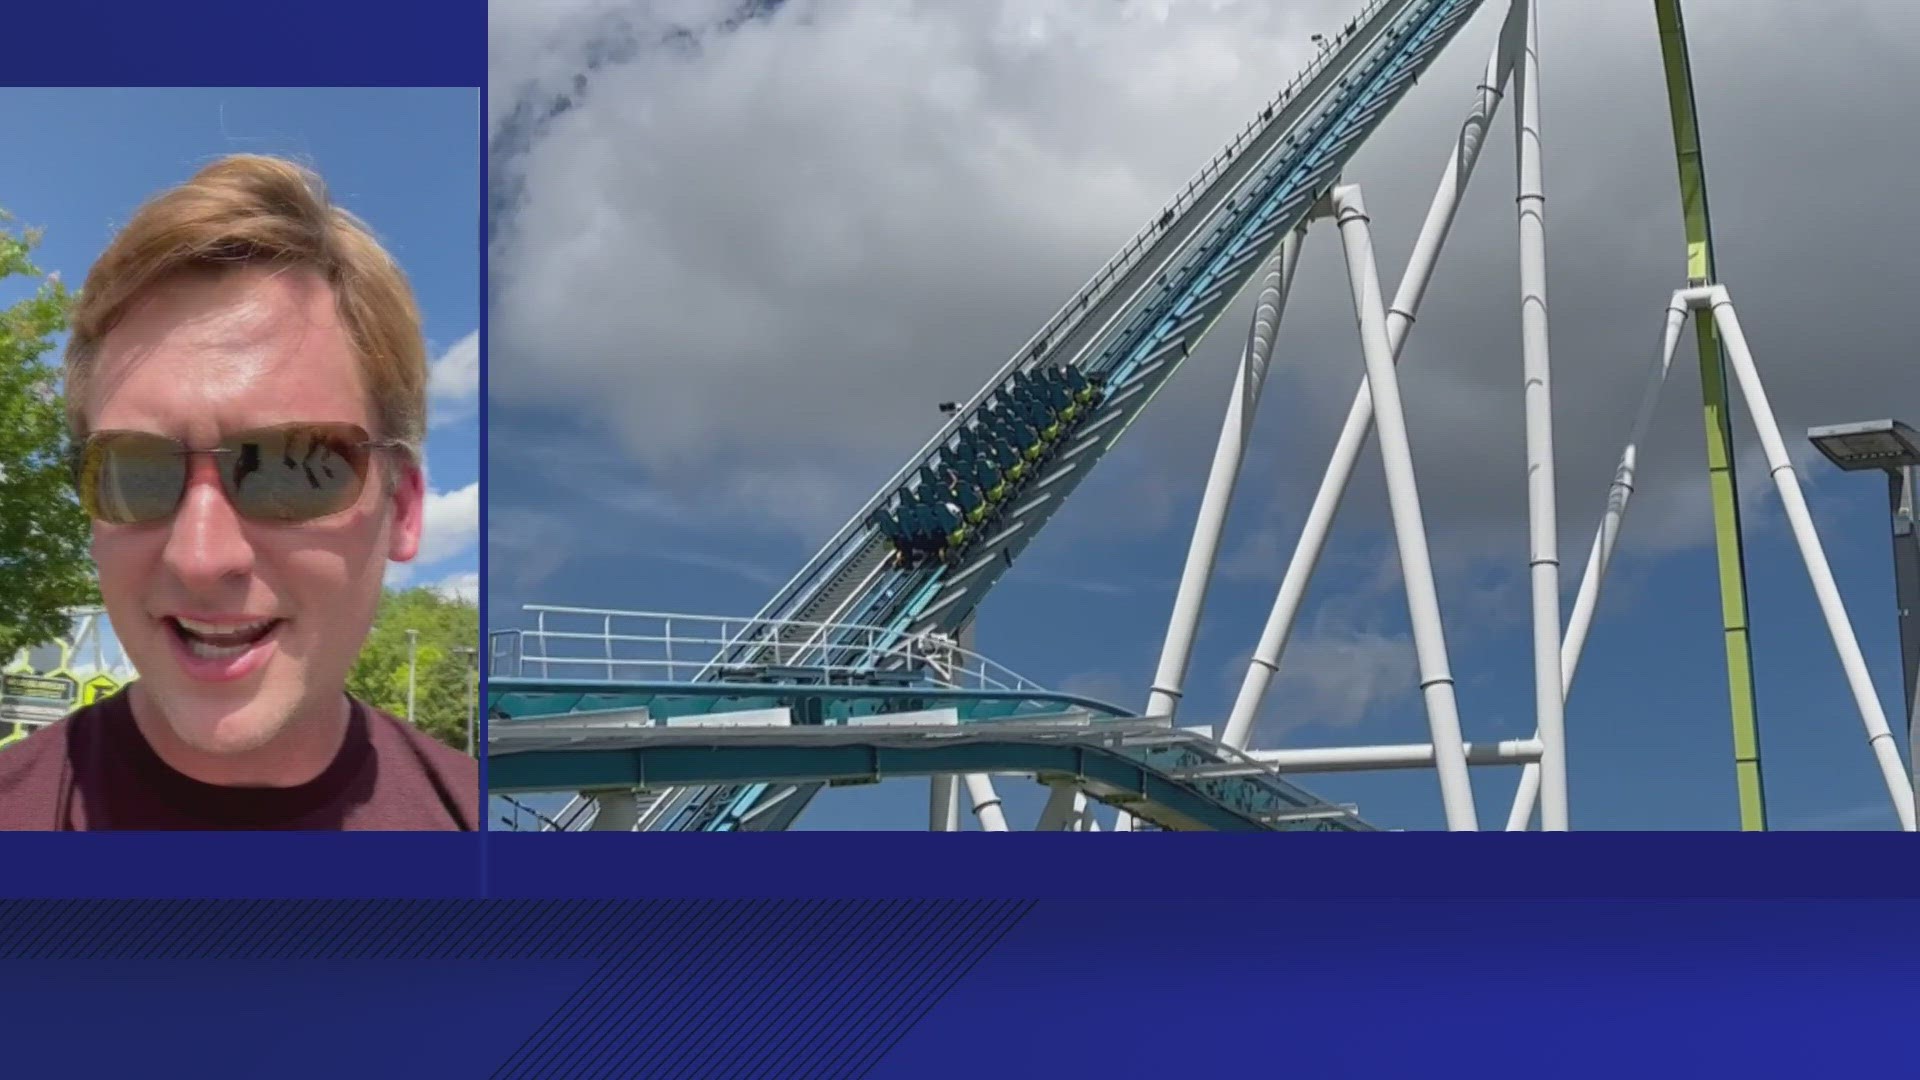 WFMY News 2 Meteorologist Christian Morgan was among the first to ride the rollercoaster when it reopened.